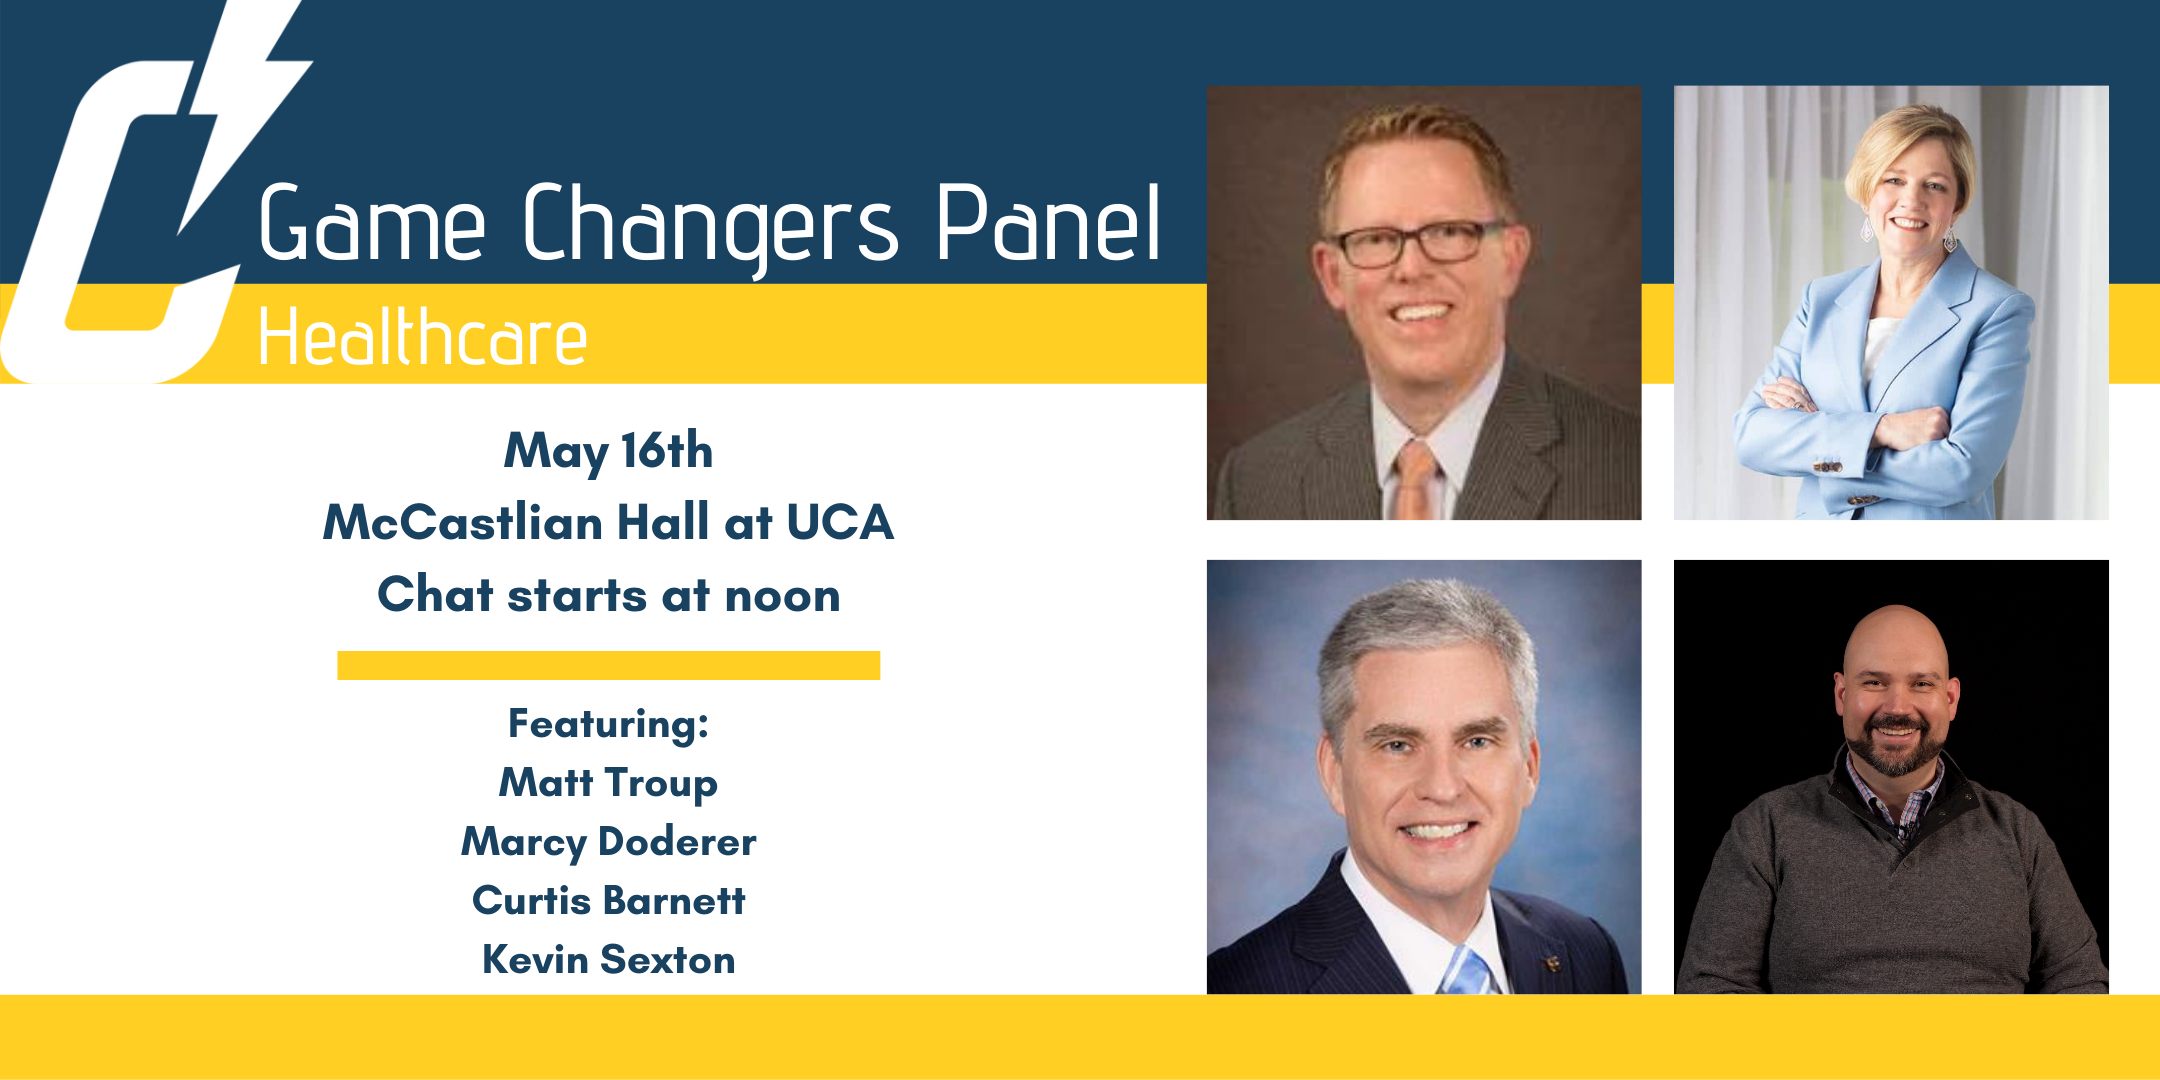 Game Changers Panel: Healthcare